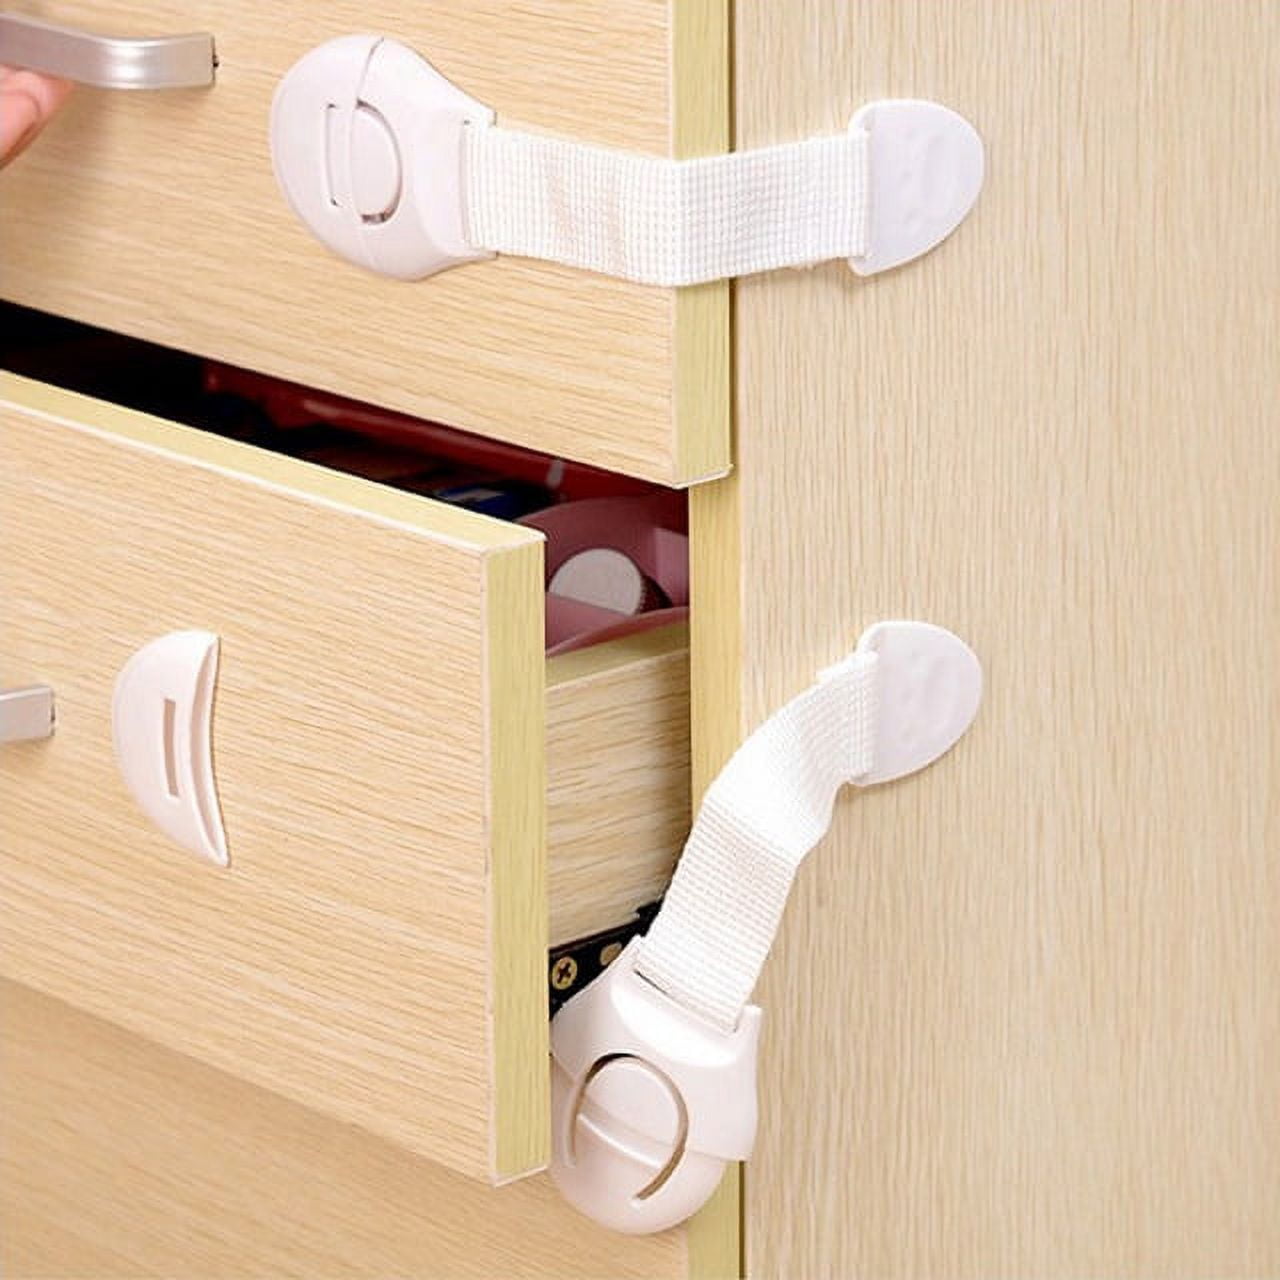 Multi-use Lazy Susan Child Safety Lock Latch Cupboard Latch for Toddlers  Children & Special Needs/2 Counts, Fridge Lock, Refrigerator -  Norway